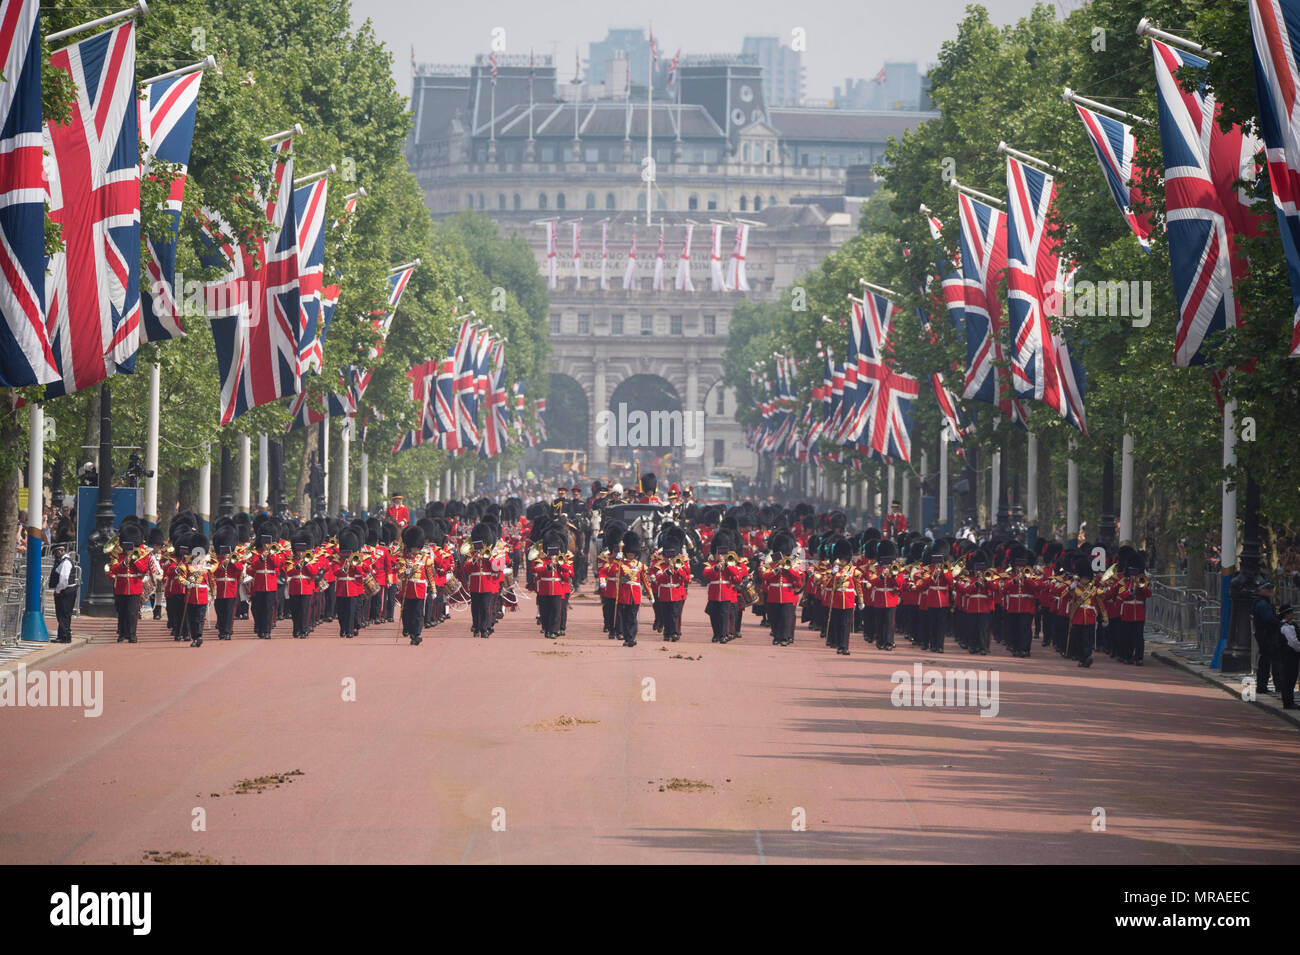 The Mall, London, UK. 26 May, 2018. Major General’s Review is held in sweltering heat, the penultimate rehearsal for the Queen’s Birthday Parade, also known as Trooping the Colour. 1400 soldiers from the Household Division and the King’s Troop Royal Horse Artillery take part in this full scale rehearsal. Credit: Malcolm Park/Alamy Live News. Stock Photo